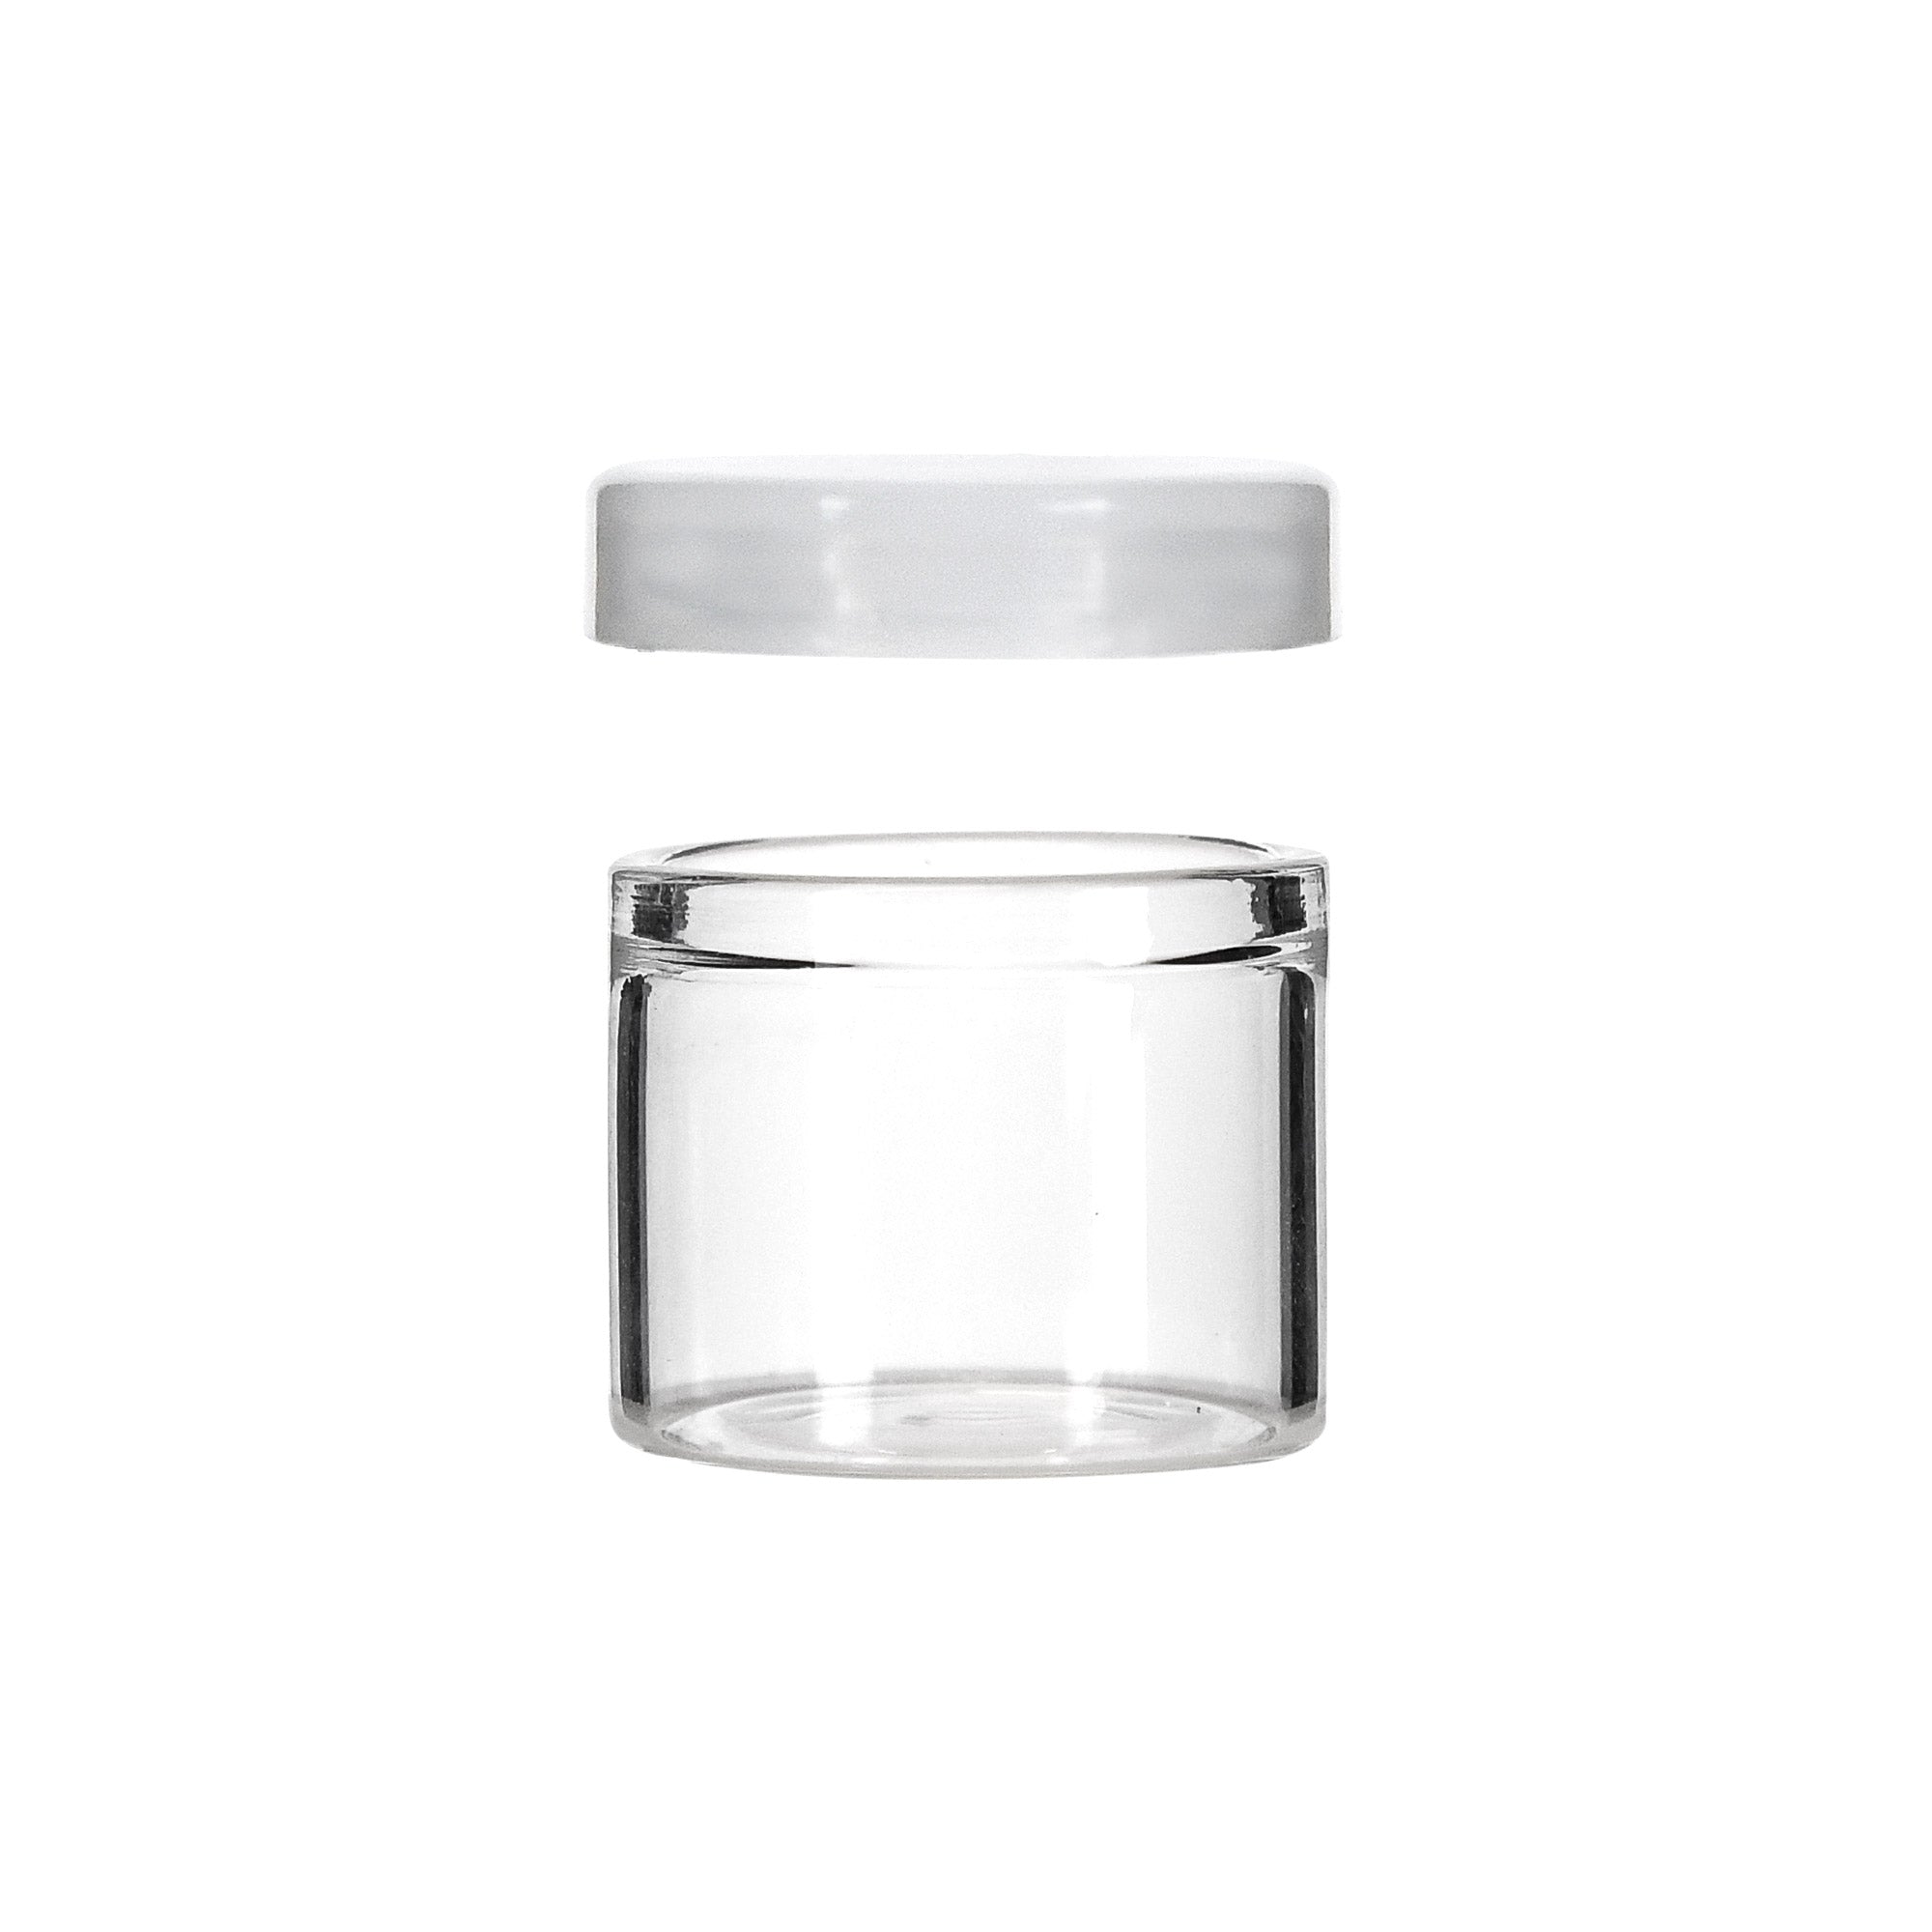 6ml Glass Wide Neck Concentrate Container With Silicone Cap - 1 Gram - 1 Count